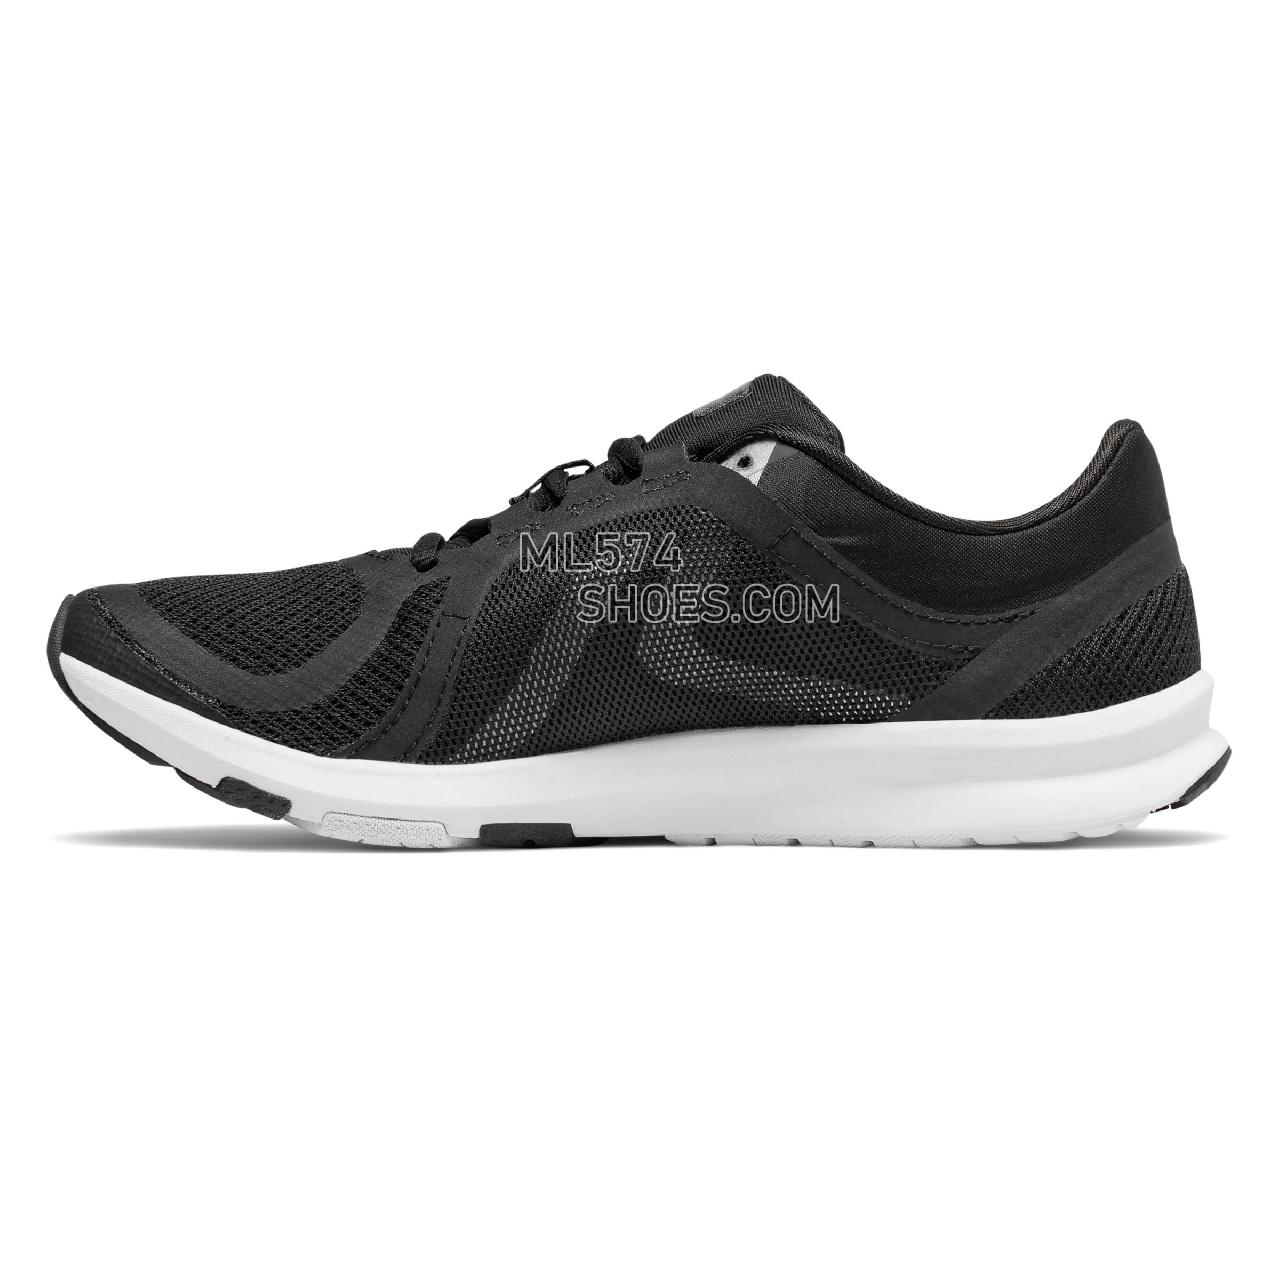 New Balance FuelCore Transform v2 Mesh Trainer - Women's 77 - X-training Black with Silver - WX77BK2